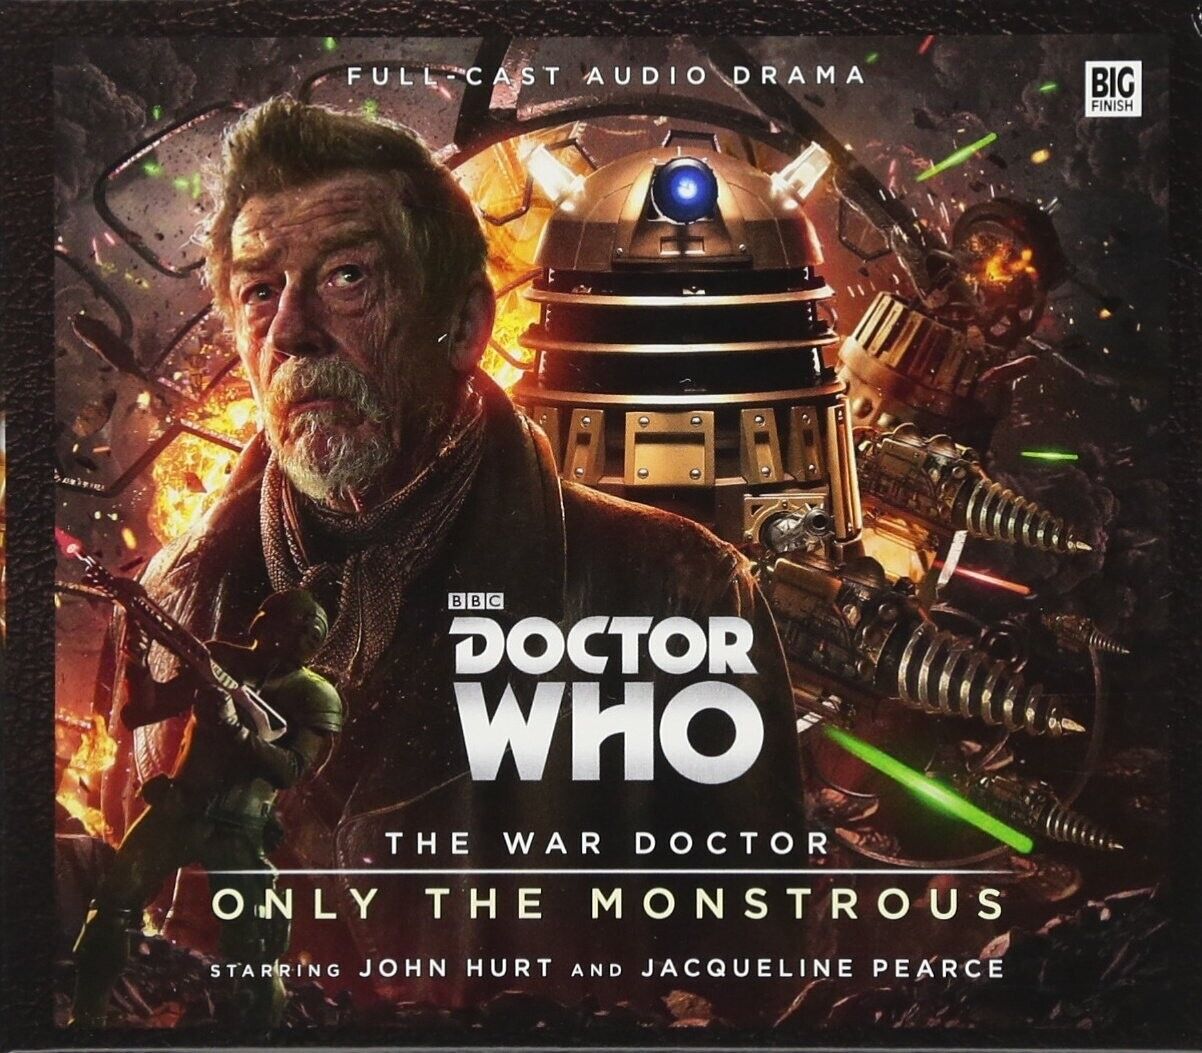 Doctor Who - THE WAR DOCTOR (John Hurt) #1: Only the Monstrous (CD)